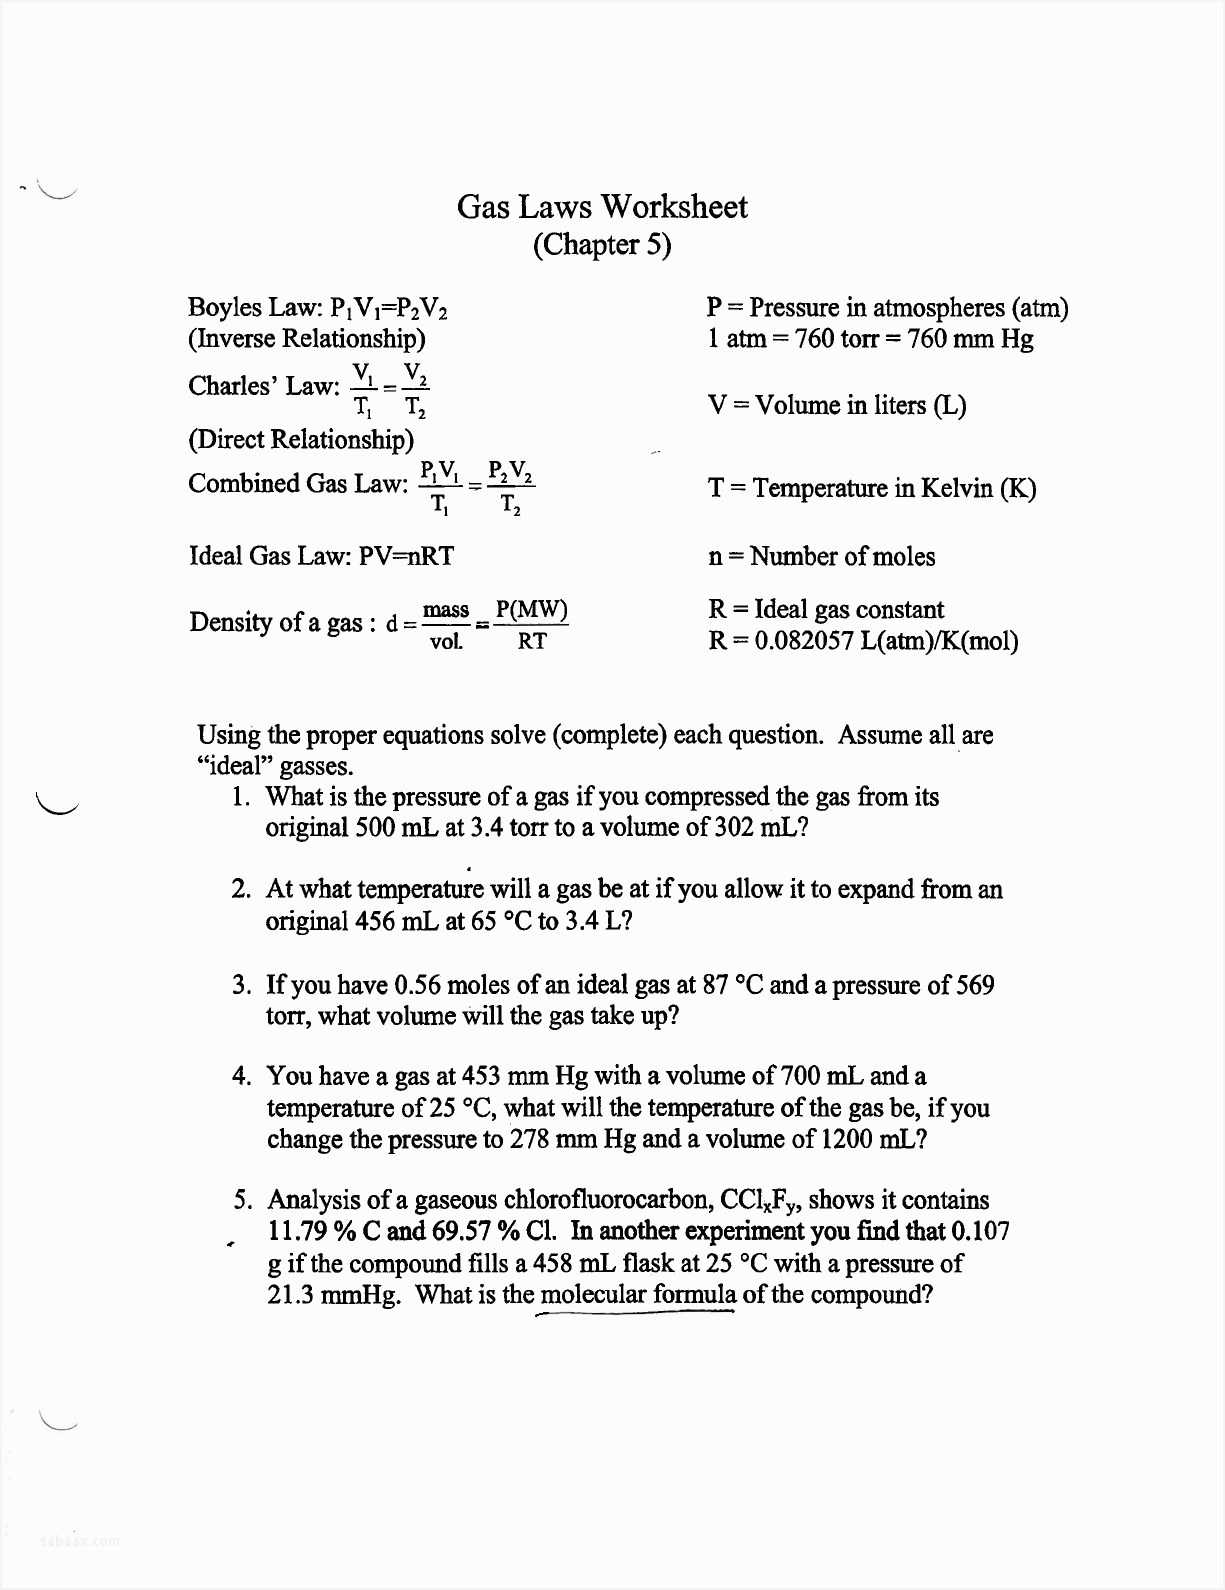 Gas Stoichiometry Worksheet with solutions or Ideal Gas Worksheet with Answers Worksheet for Kids Maths